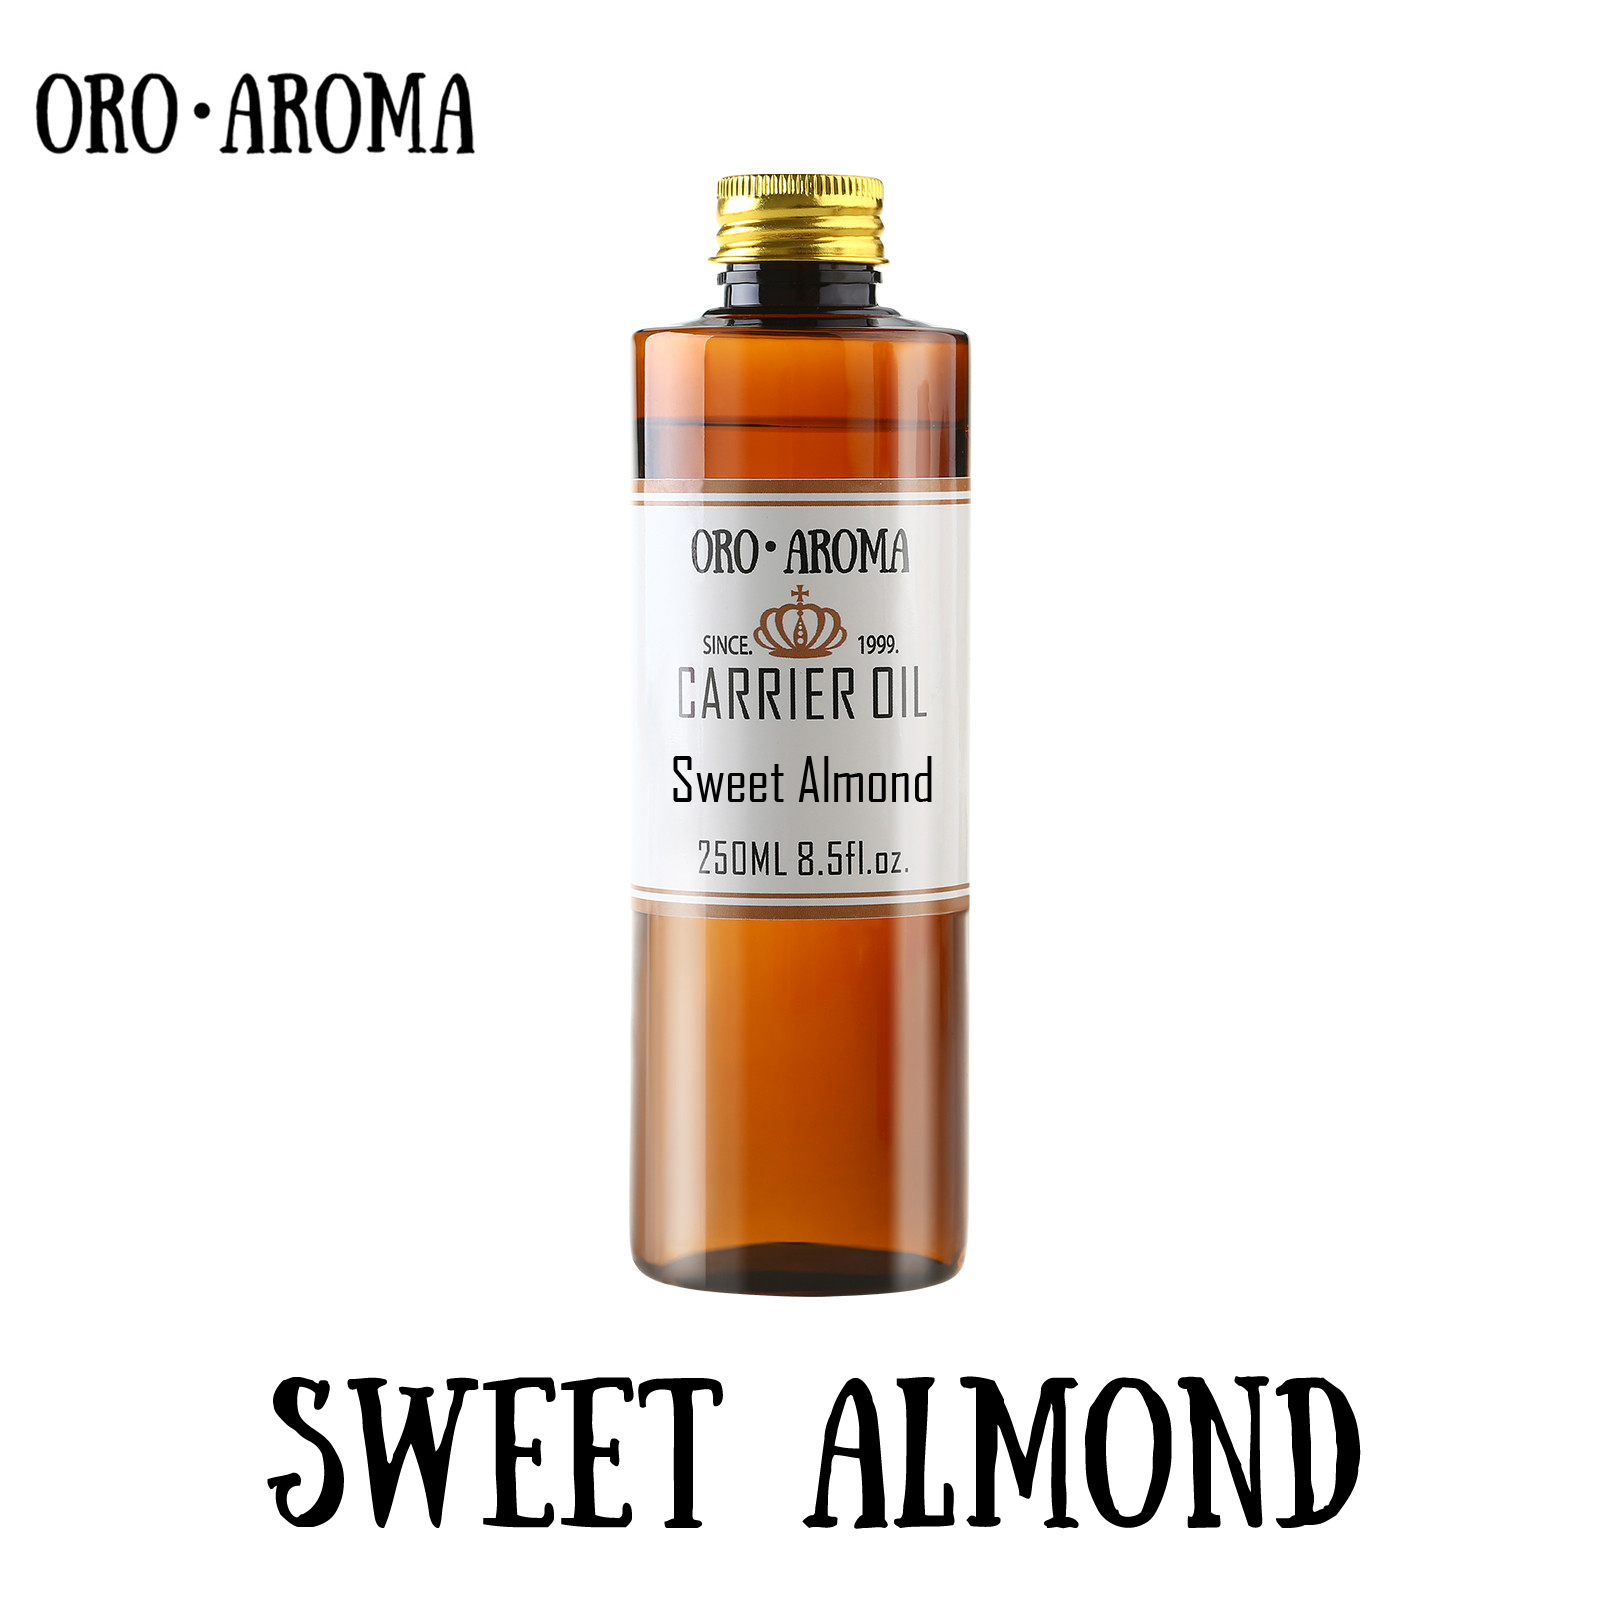 Famous brand oroaroma sweet almond oil natural aromatherapy highcapacity skin body care massage spa sweet almond essential oil